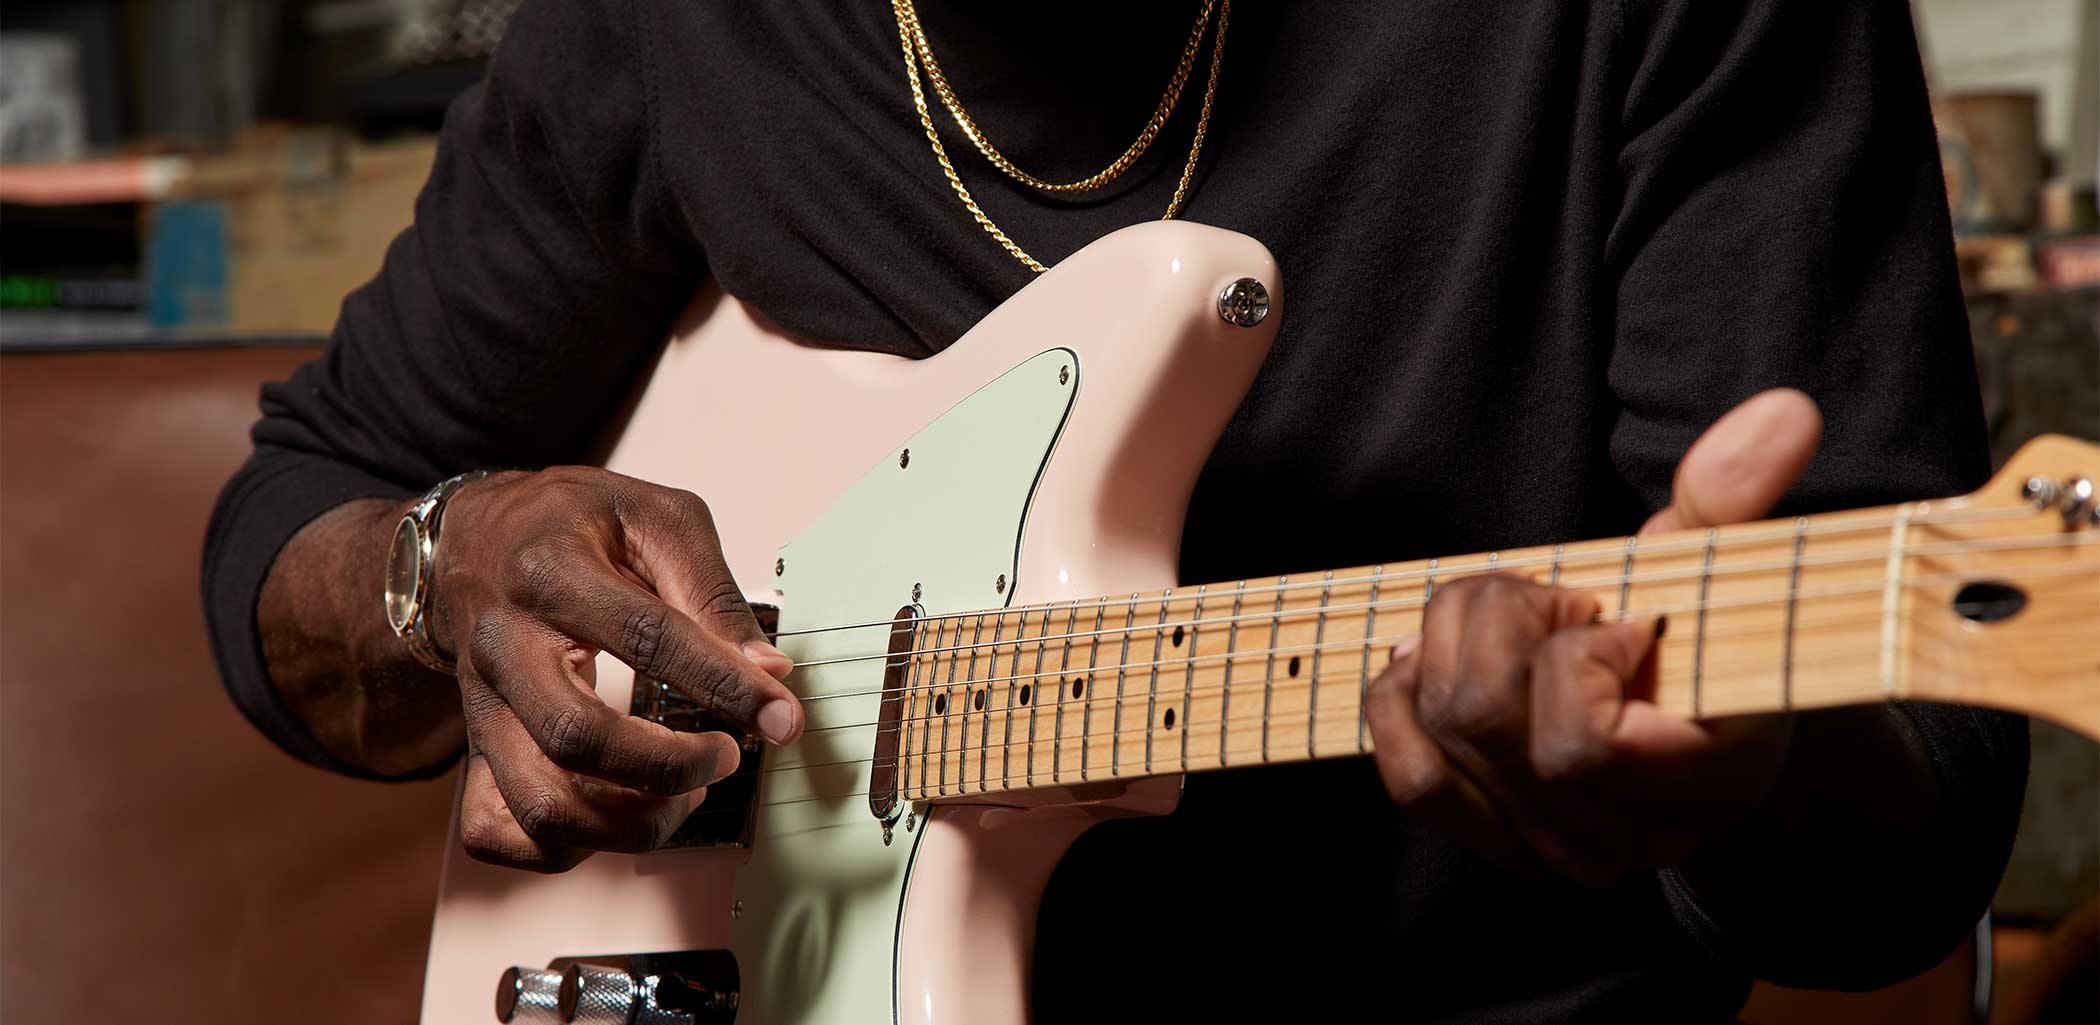 Squier Pink Offset Guitar Close Up Being Played